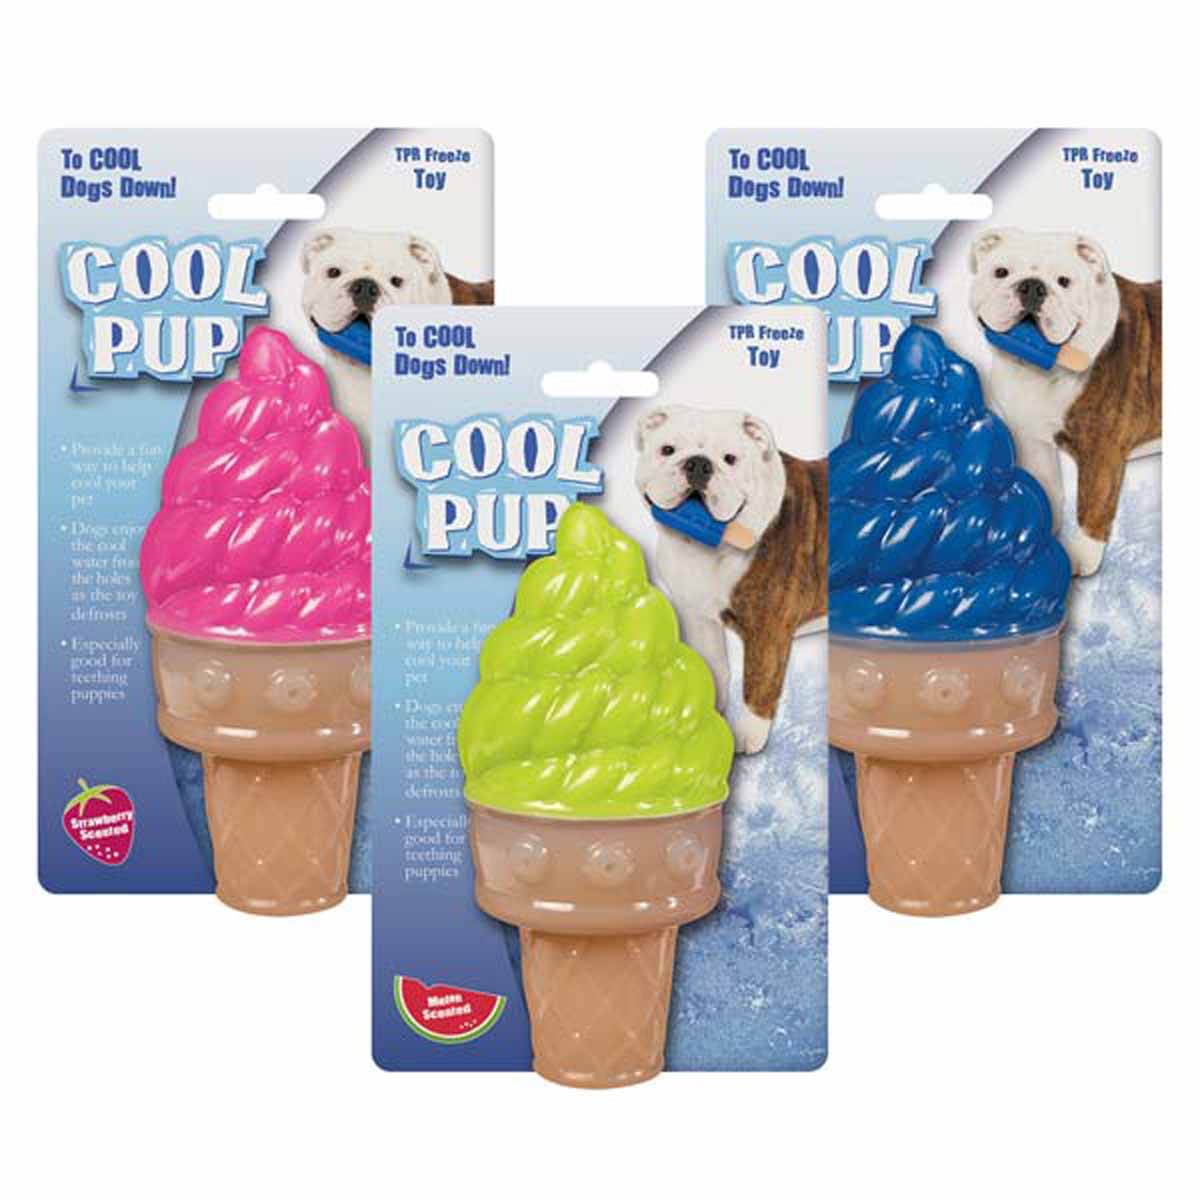 Cool Pup Dog Toy Rocket Pop Ice Cream Popsicle Shaped Frozen Water Summer Toys JJ154220